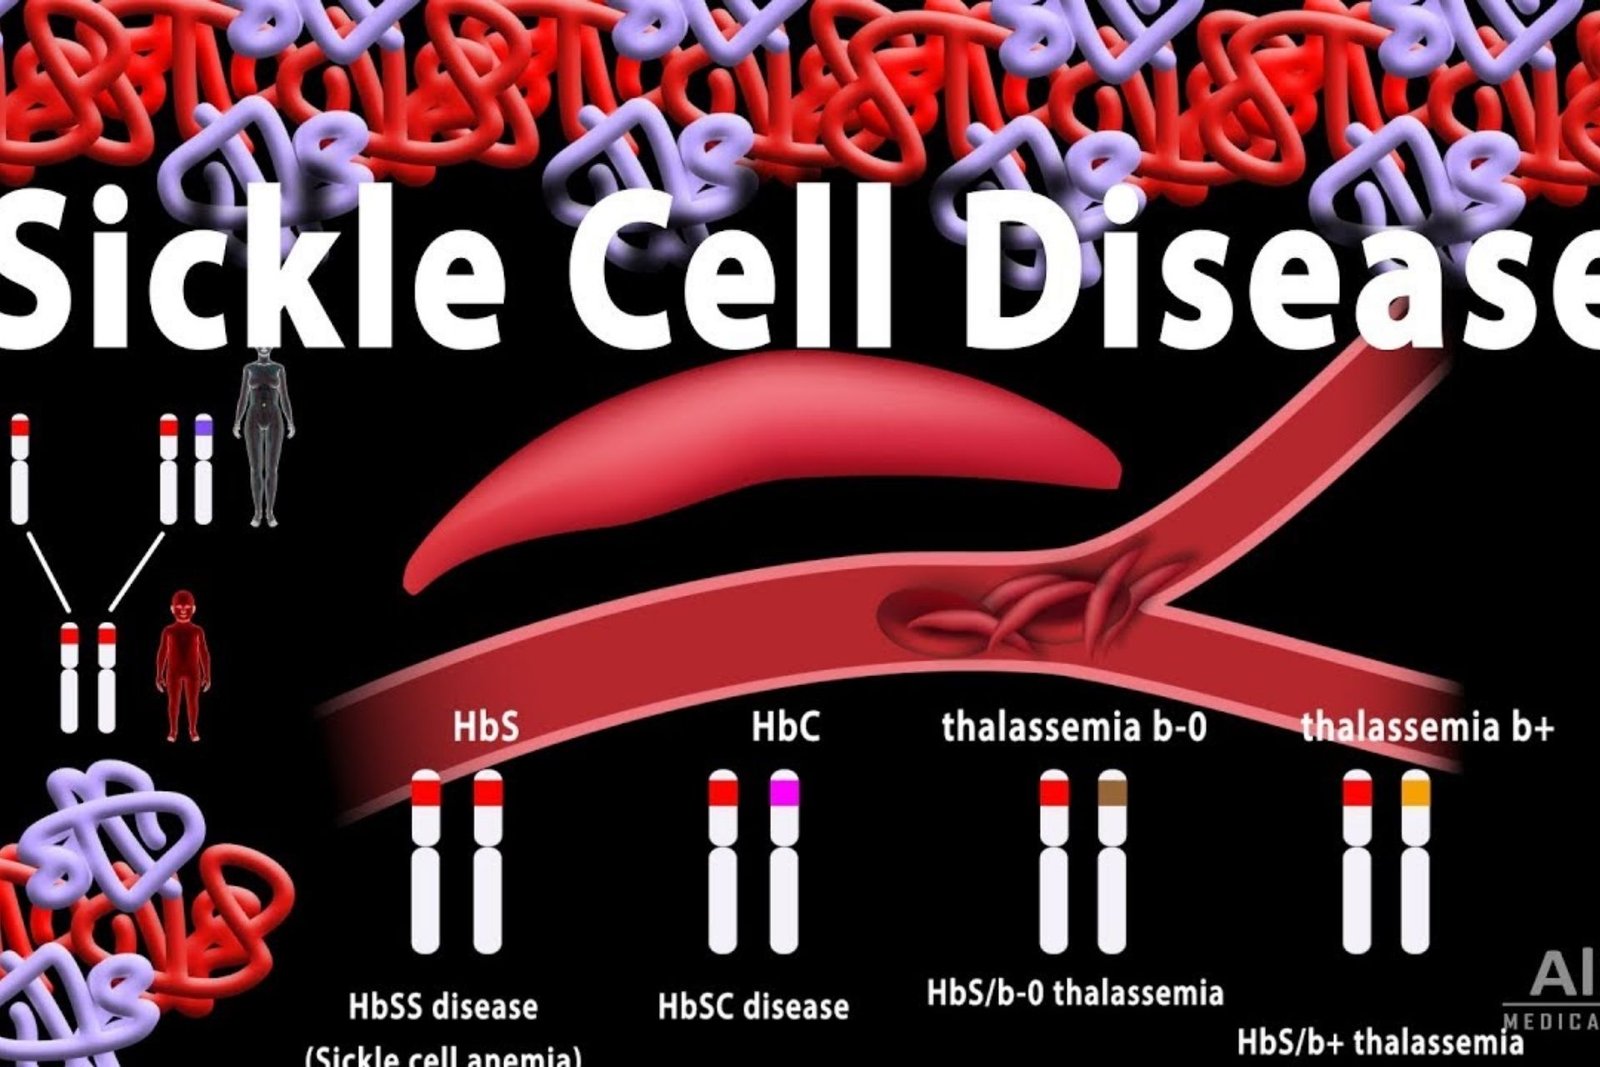 SICKLE CELL